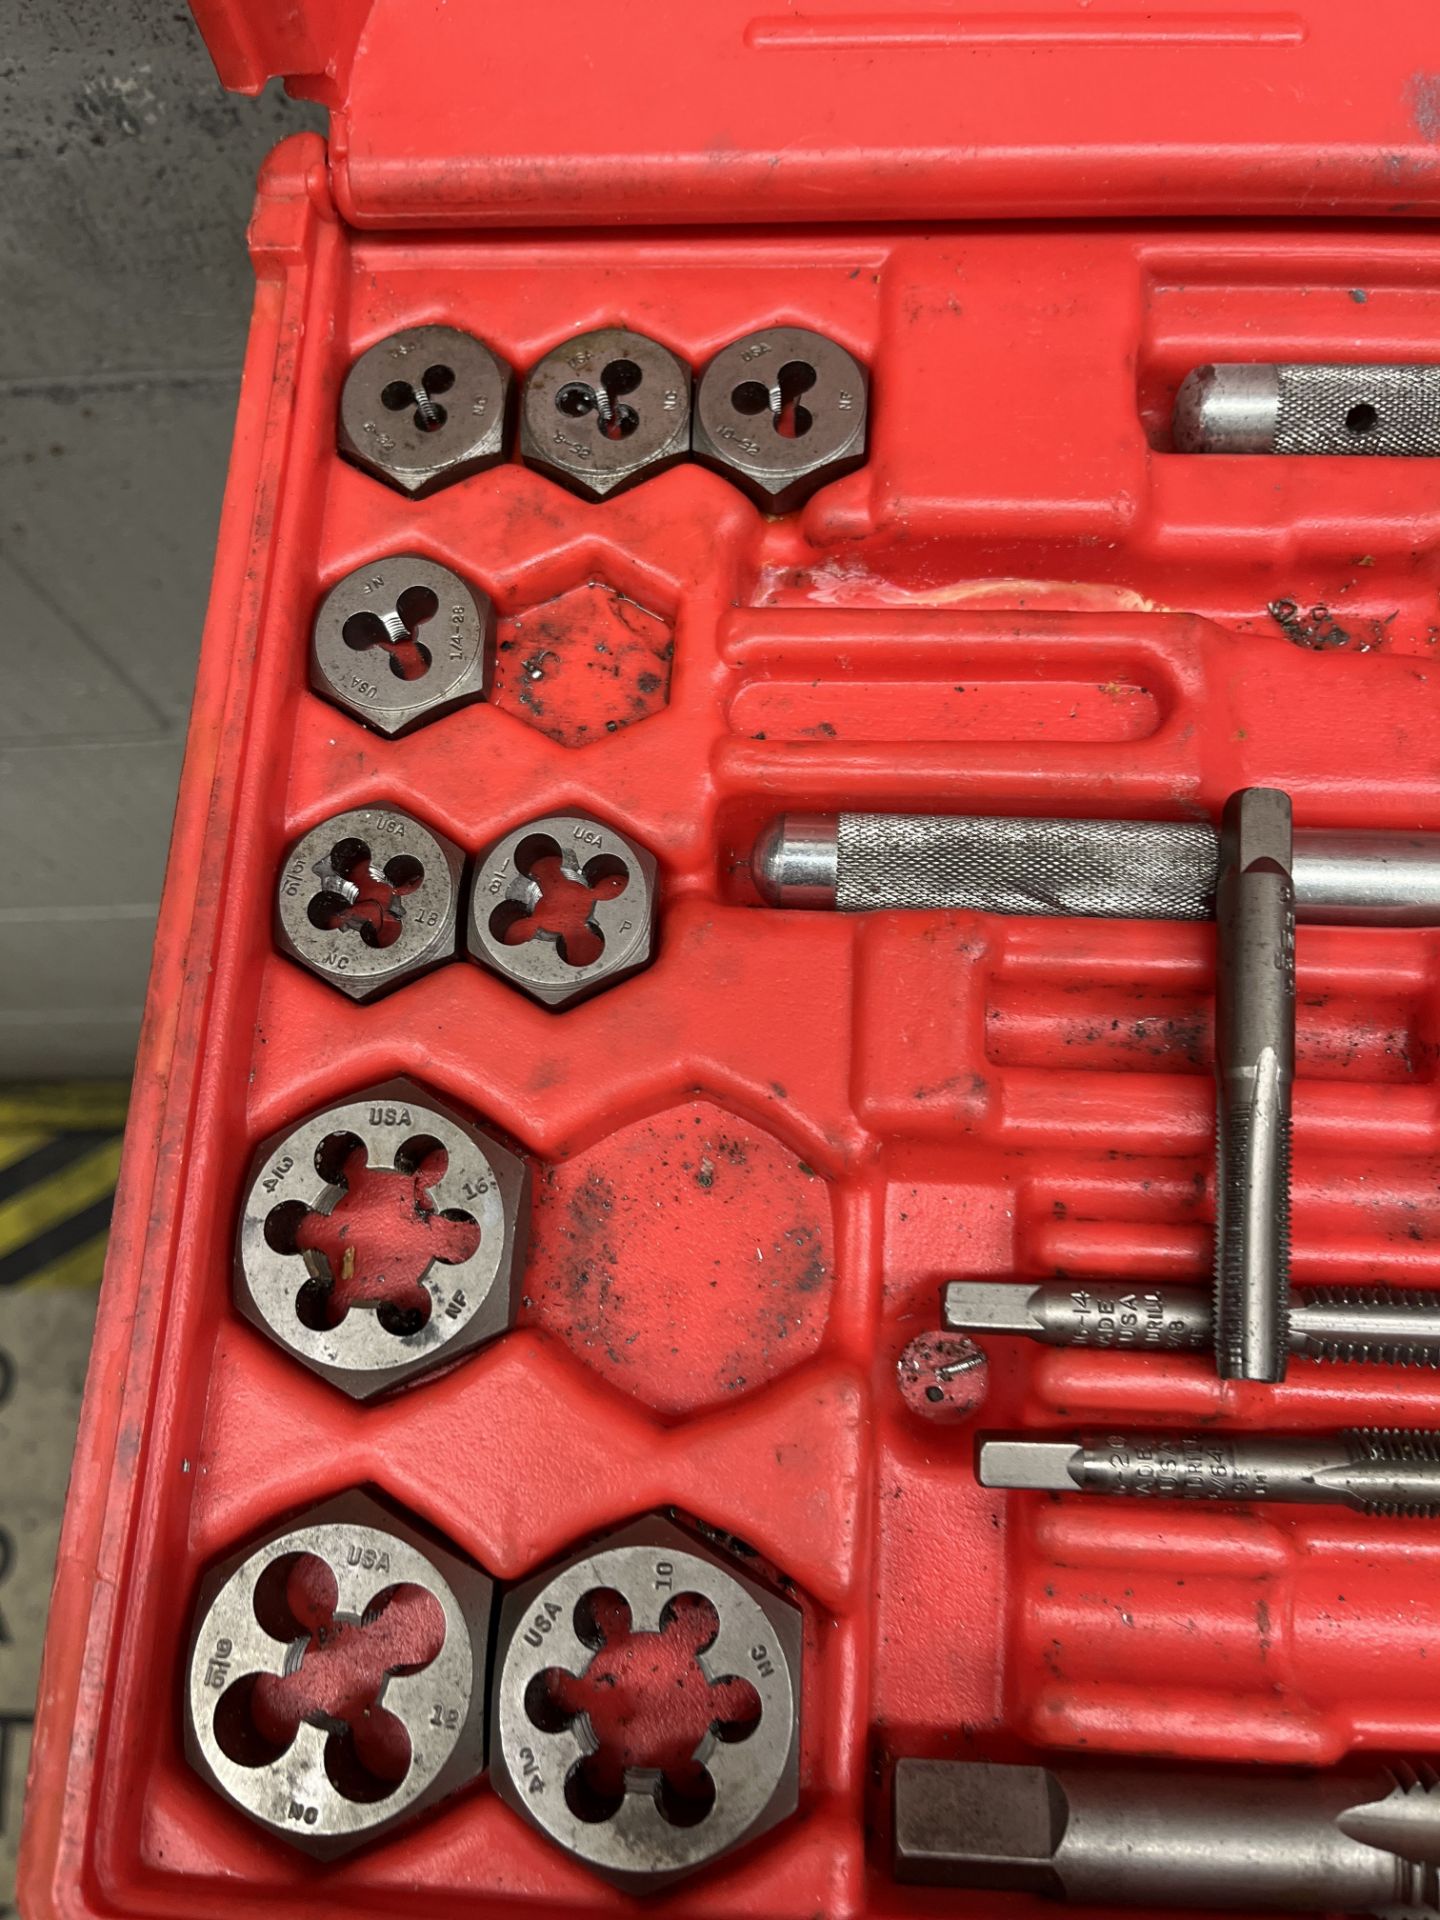 VERMONT TAP AND DIE SET WITH WRENCHES IN CASE - Image 8 of 10